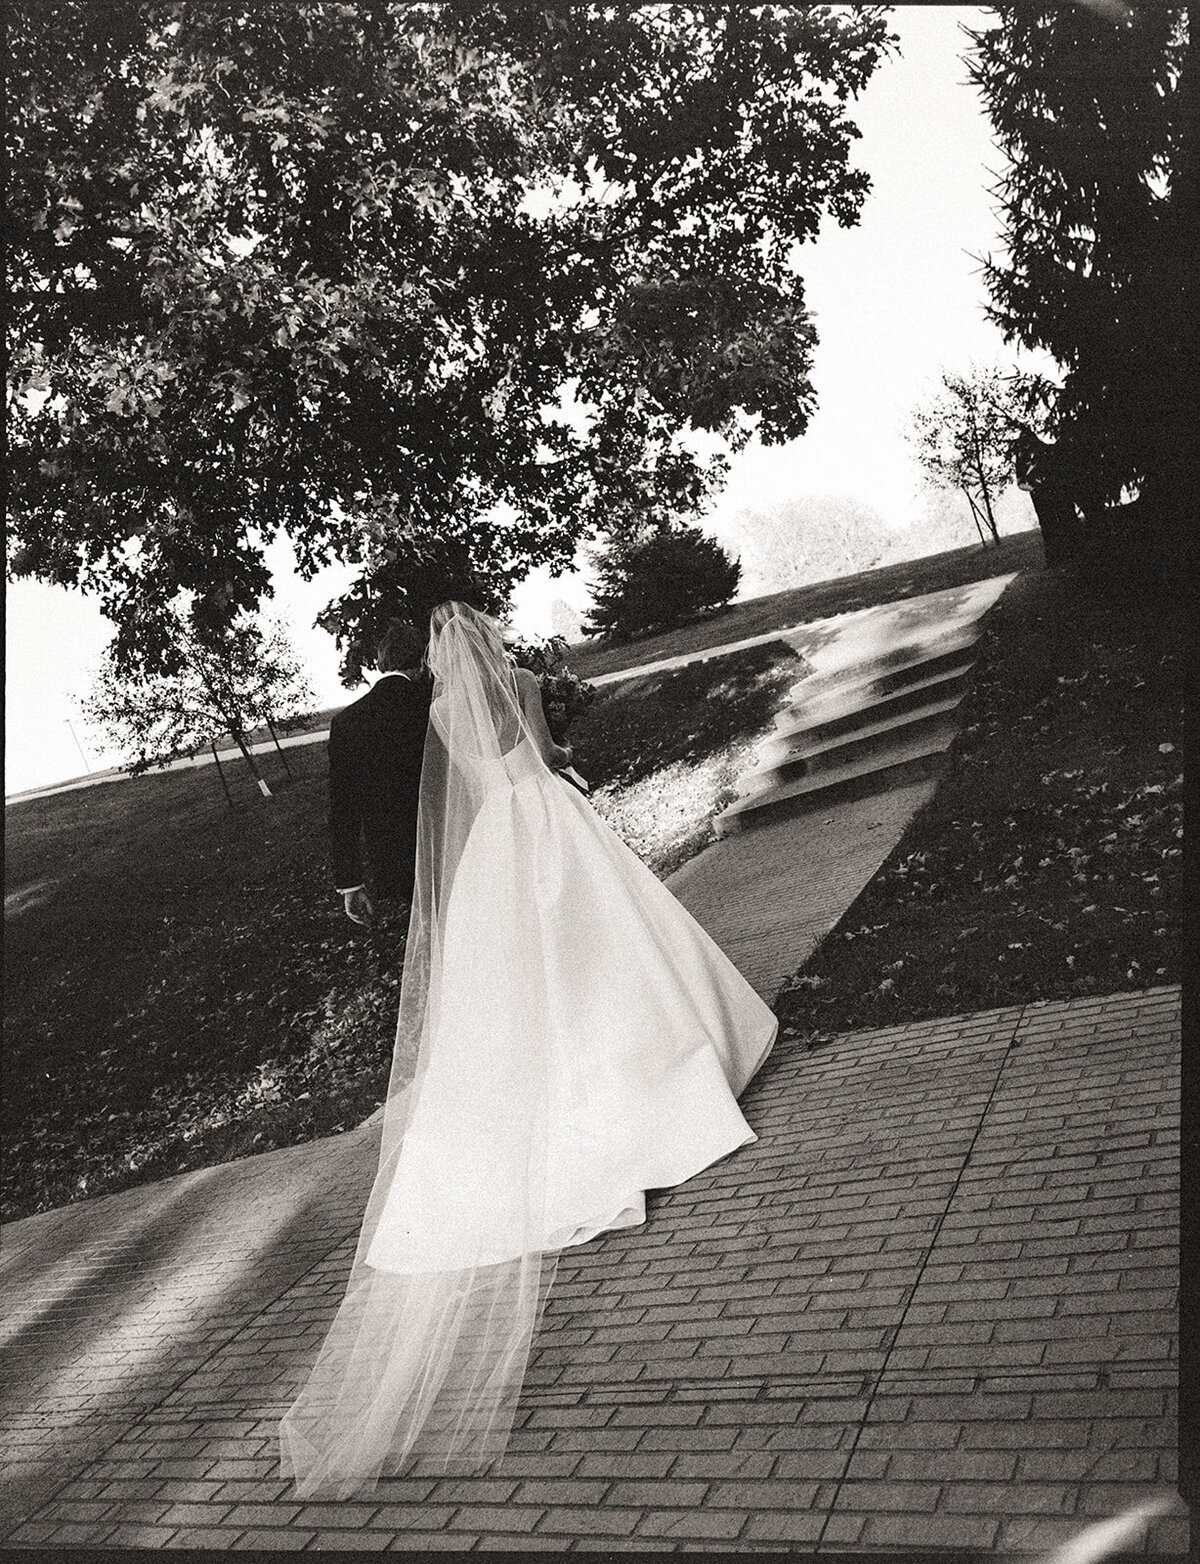 A bride in a flowing gown and veil walks hand in hand with a suited groom along a paved path, surrounded by trees and soft sunlight during an Iowa wedding.